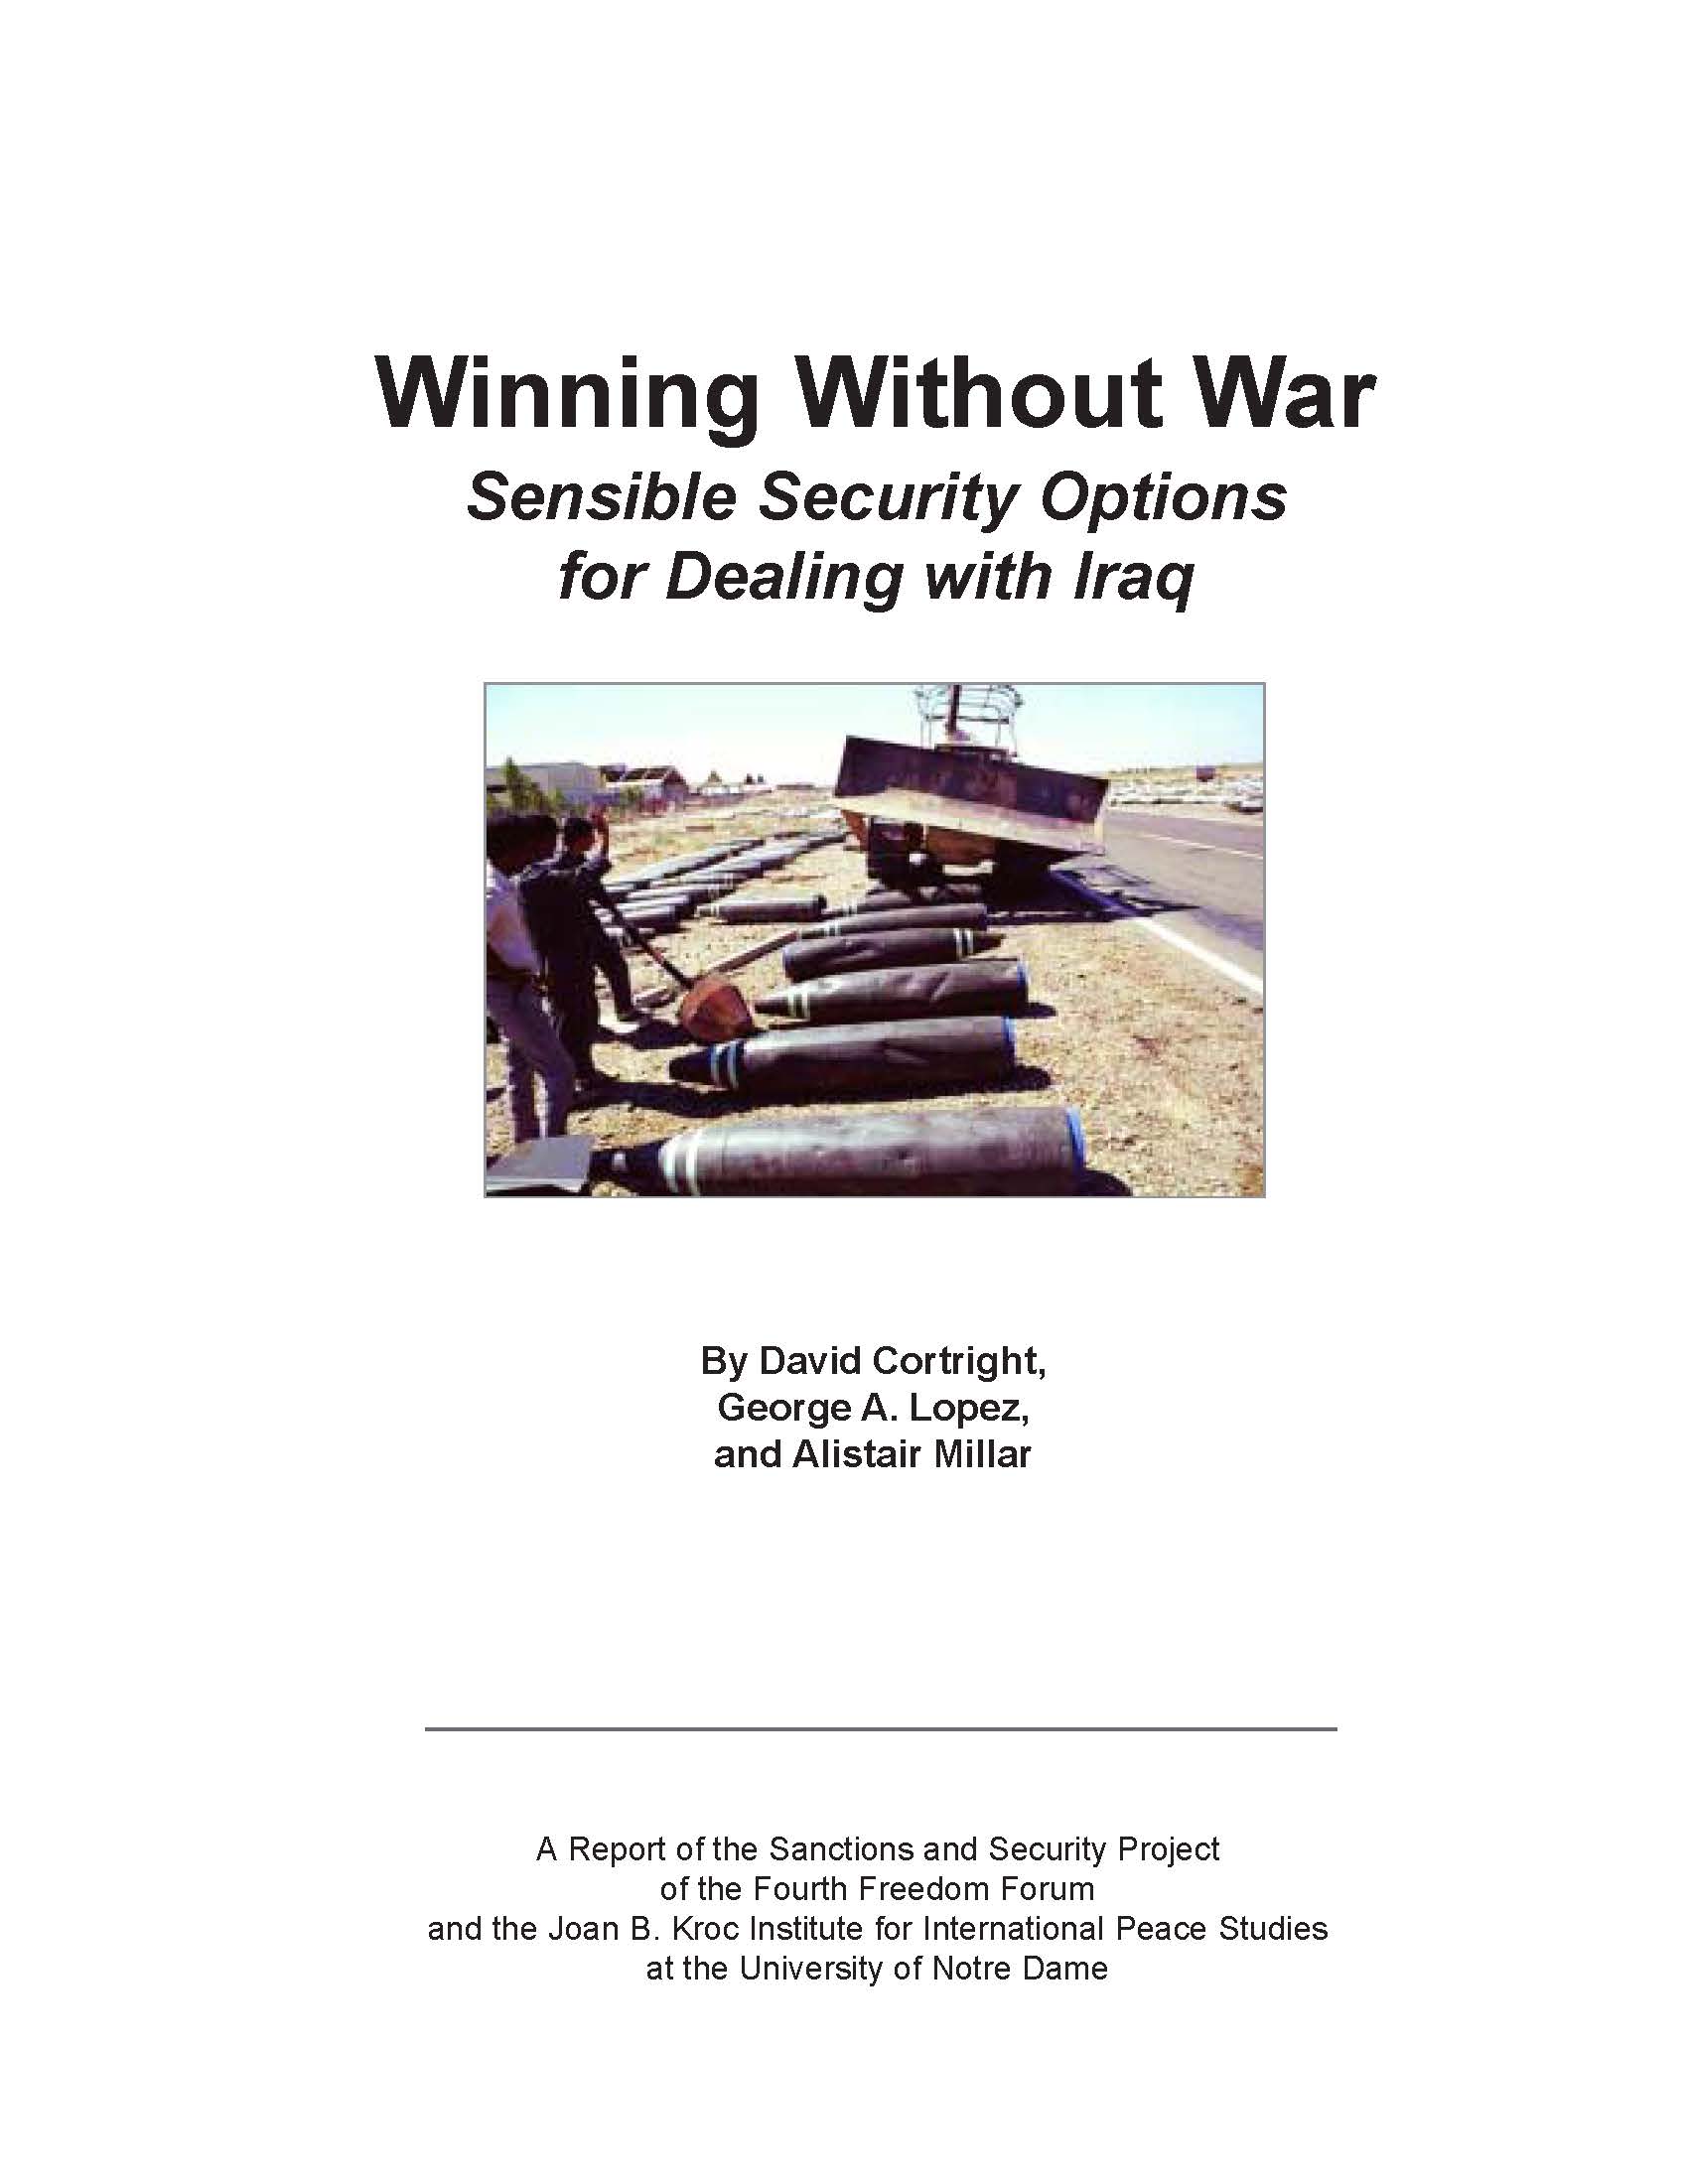 Winning Without War: Sensible Security Options for Dealing with Iraq